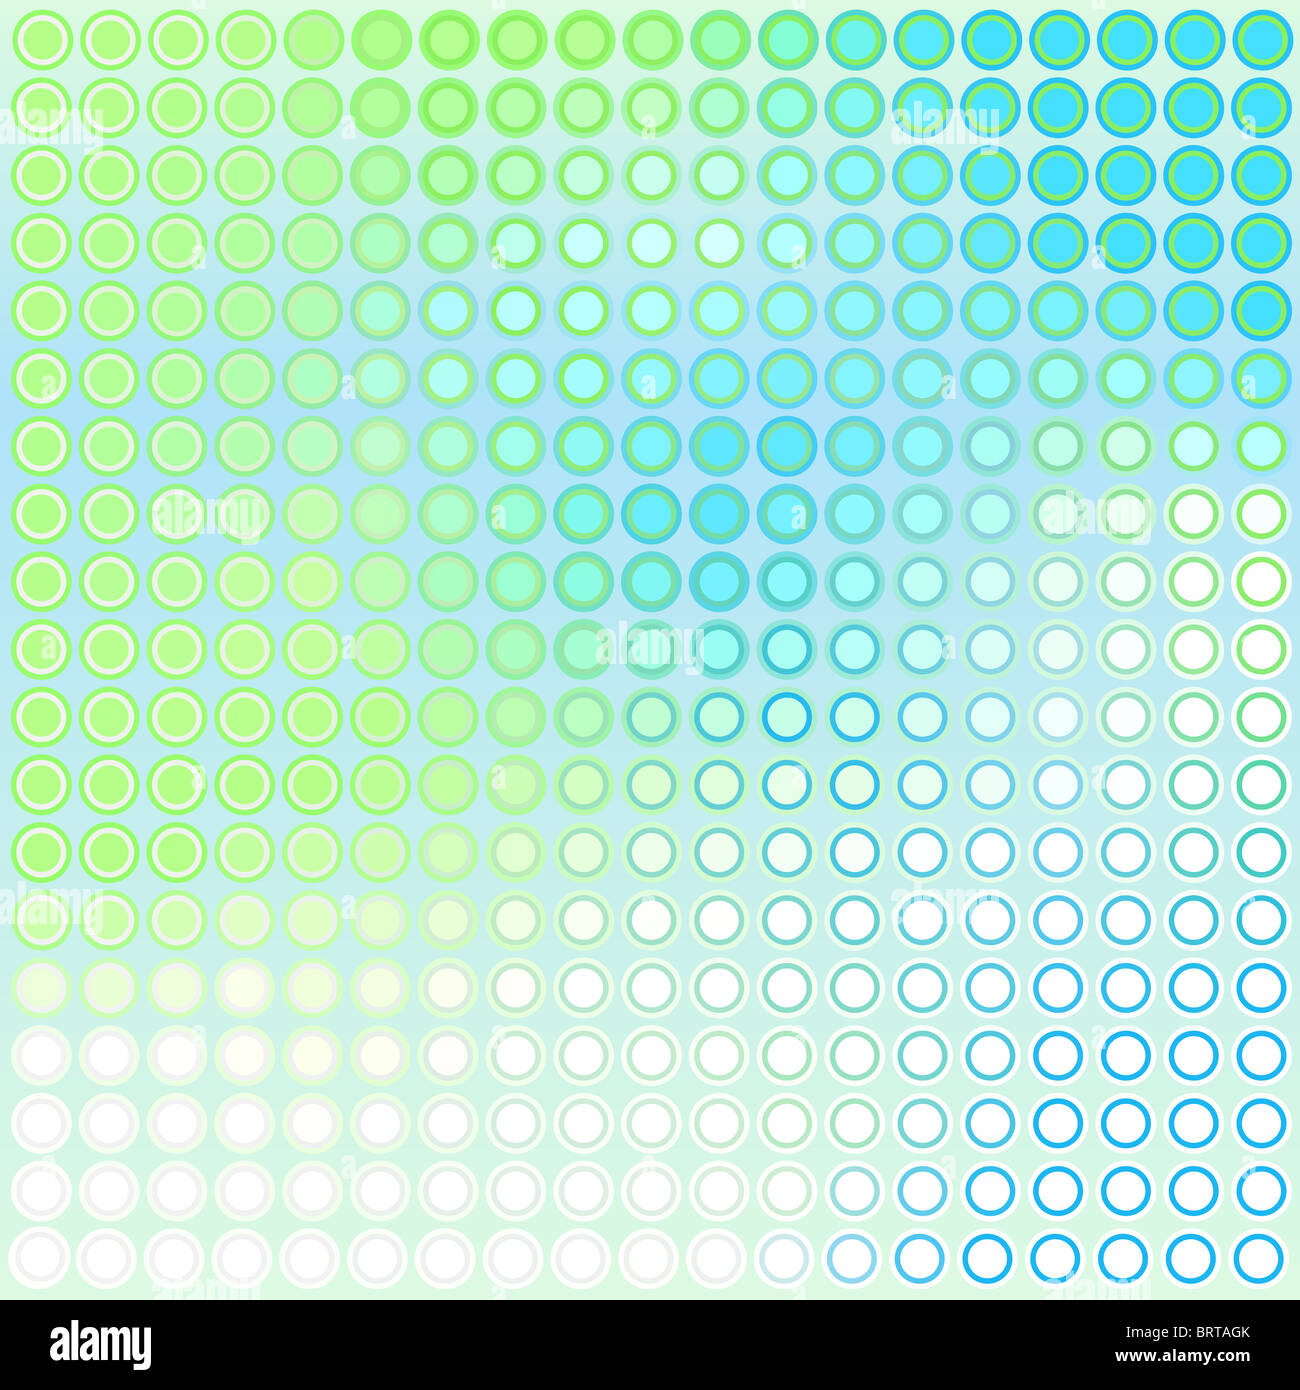 Abstract illustrated background of blue and green dots Stock Photo